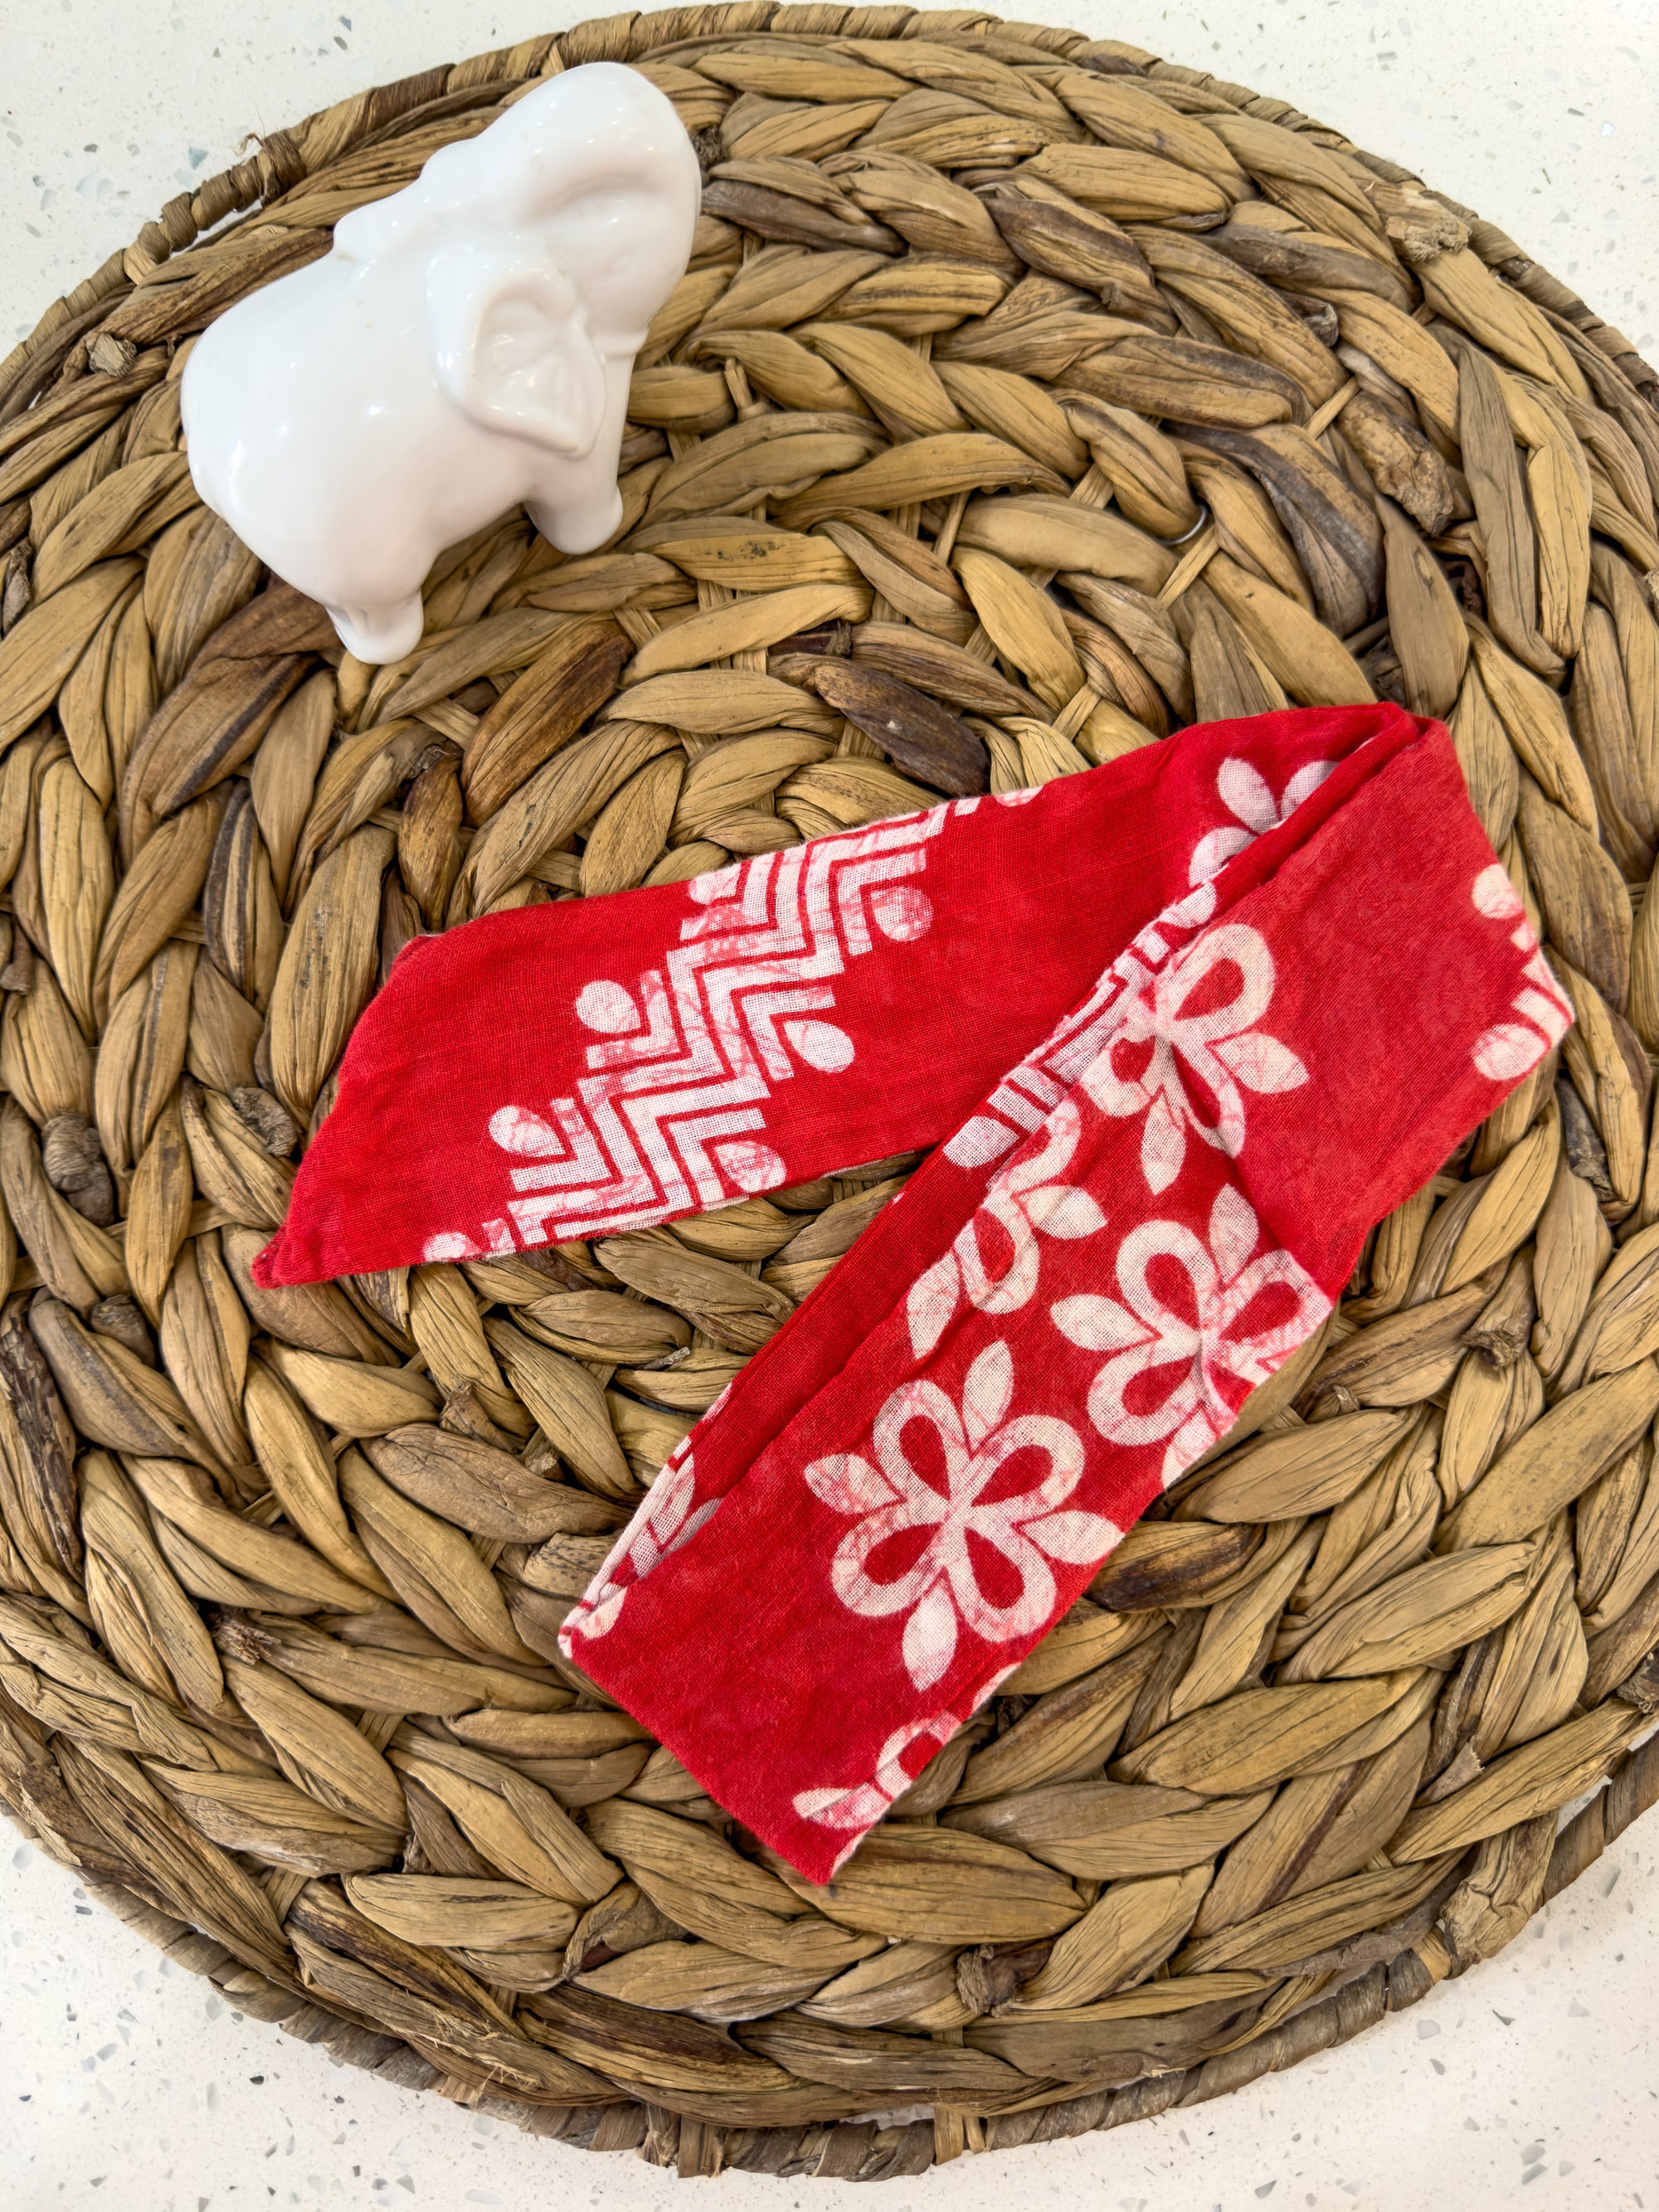 a basket with two red towels and a white elephant figurine